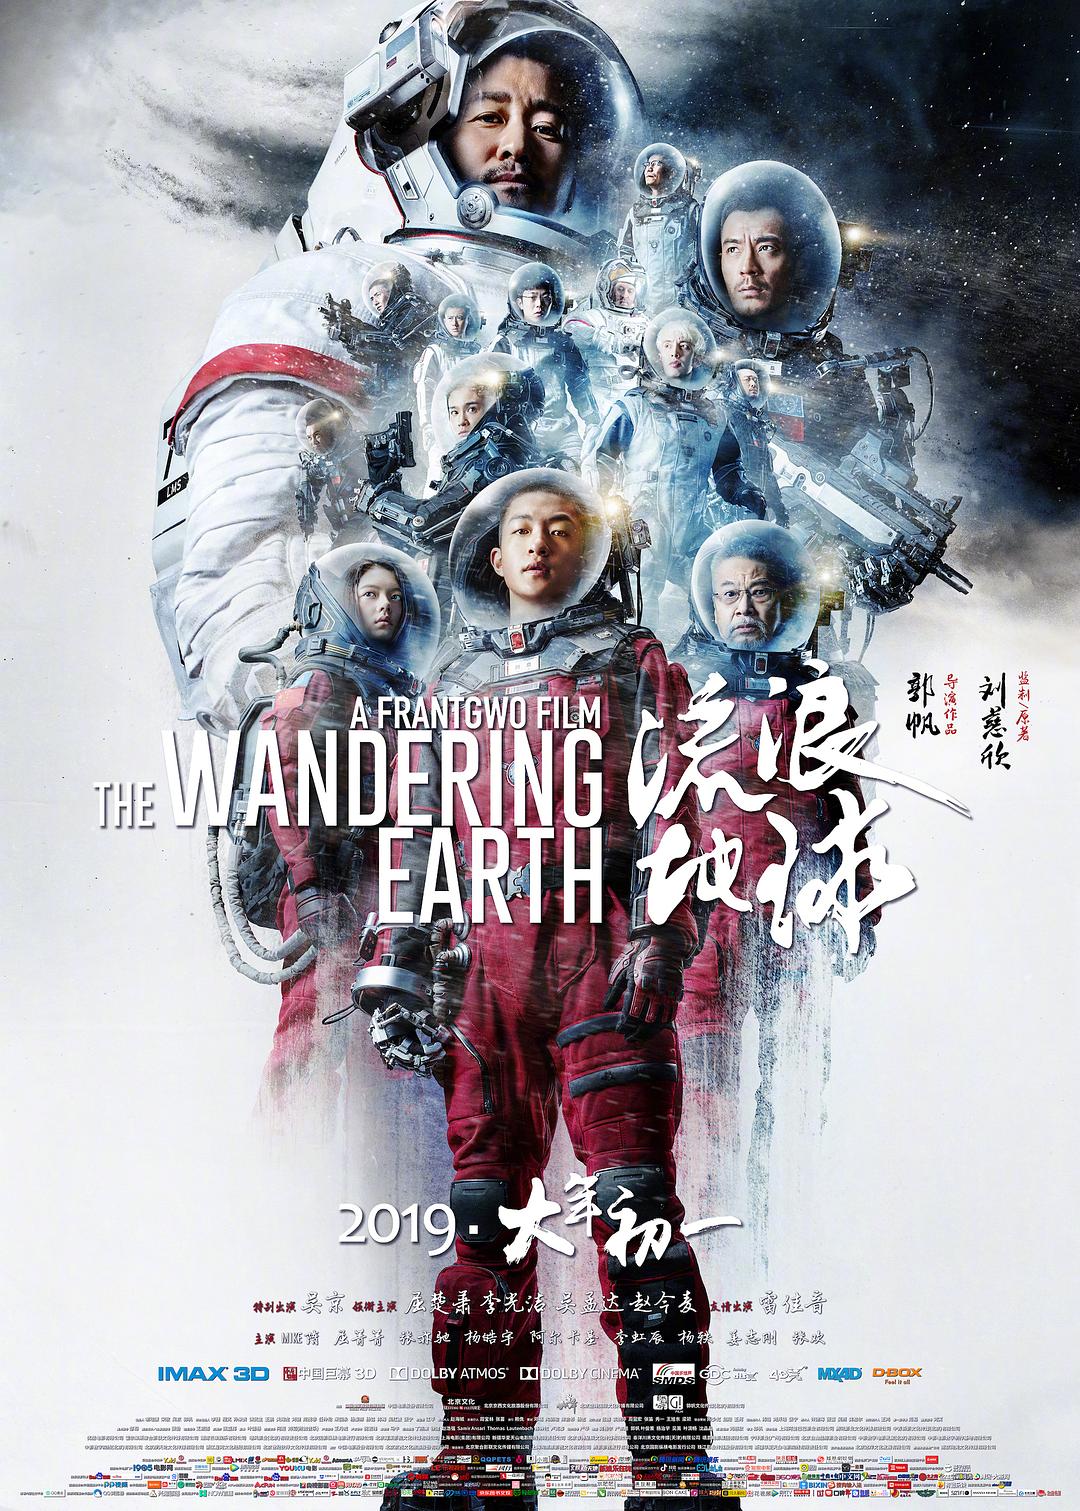 ˵ The.Wandering.Earth.2018.1080p.BluRay.x264-REGRET 8.76GB-1.png